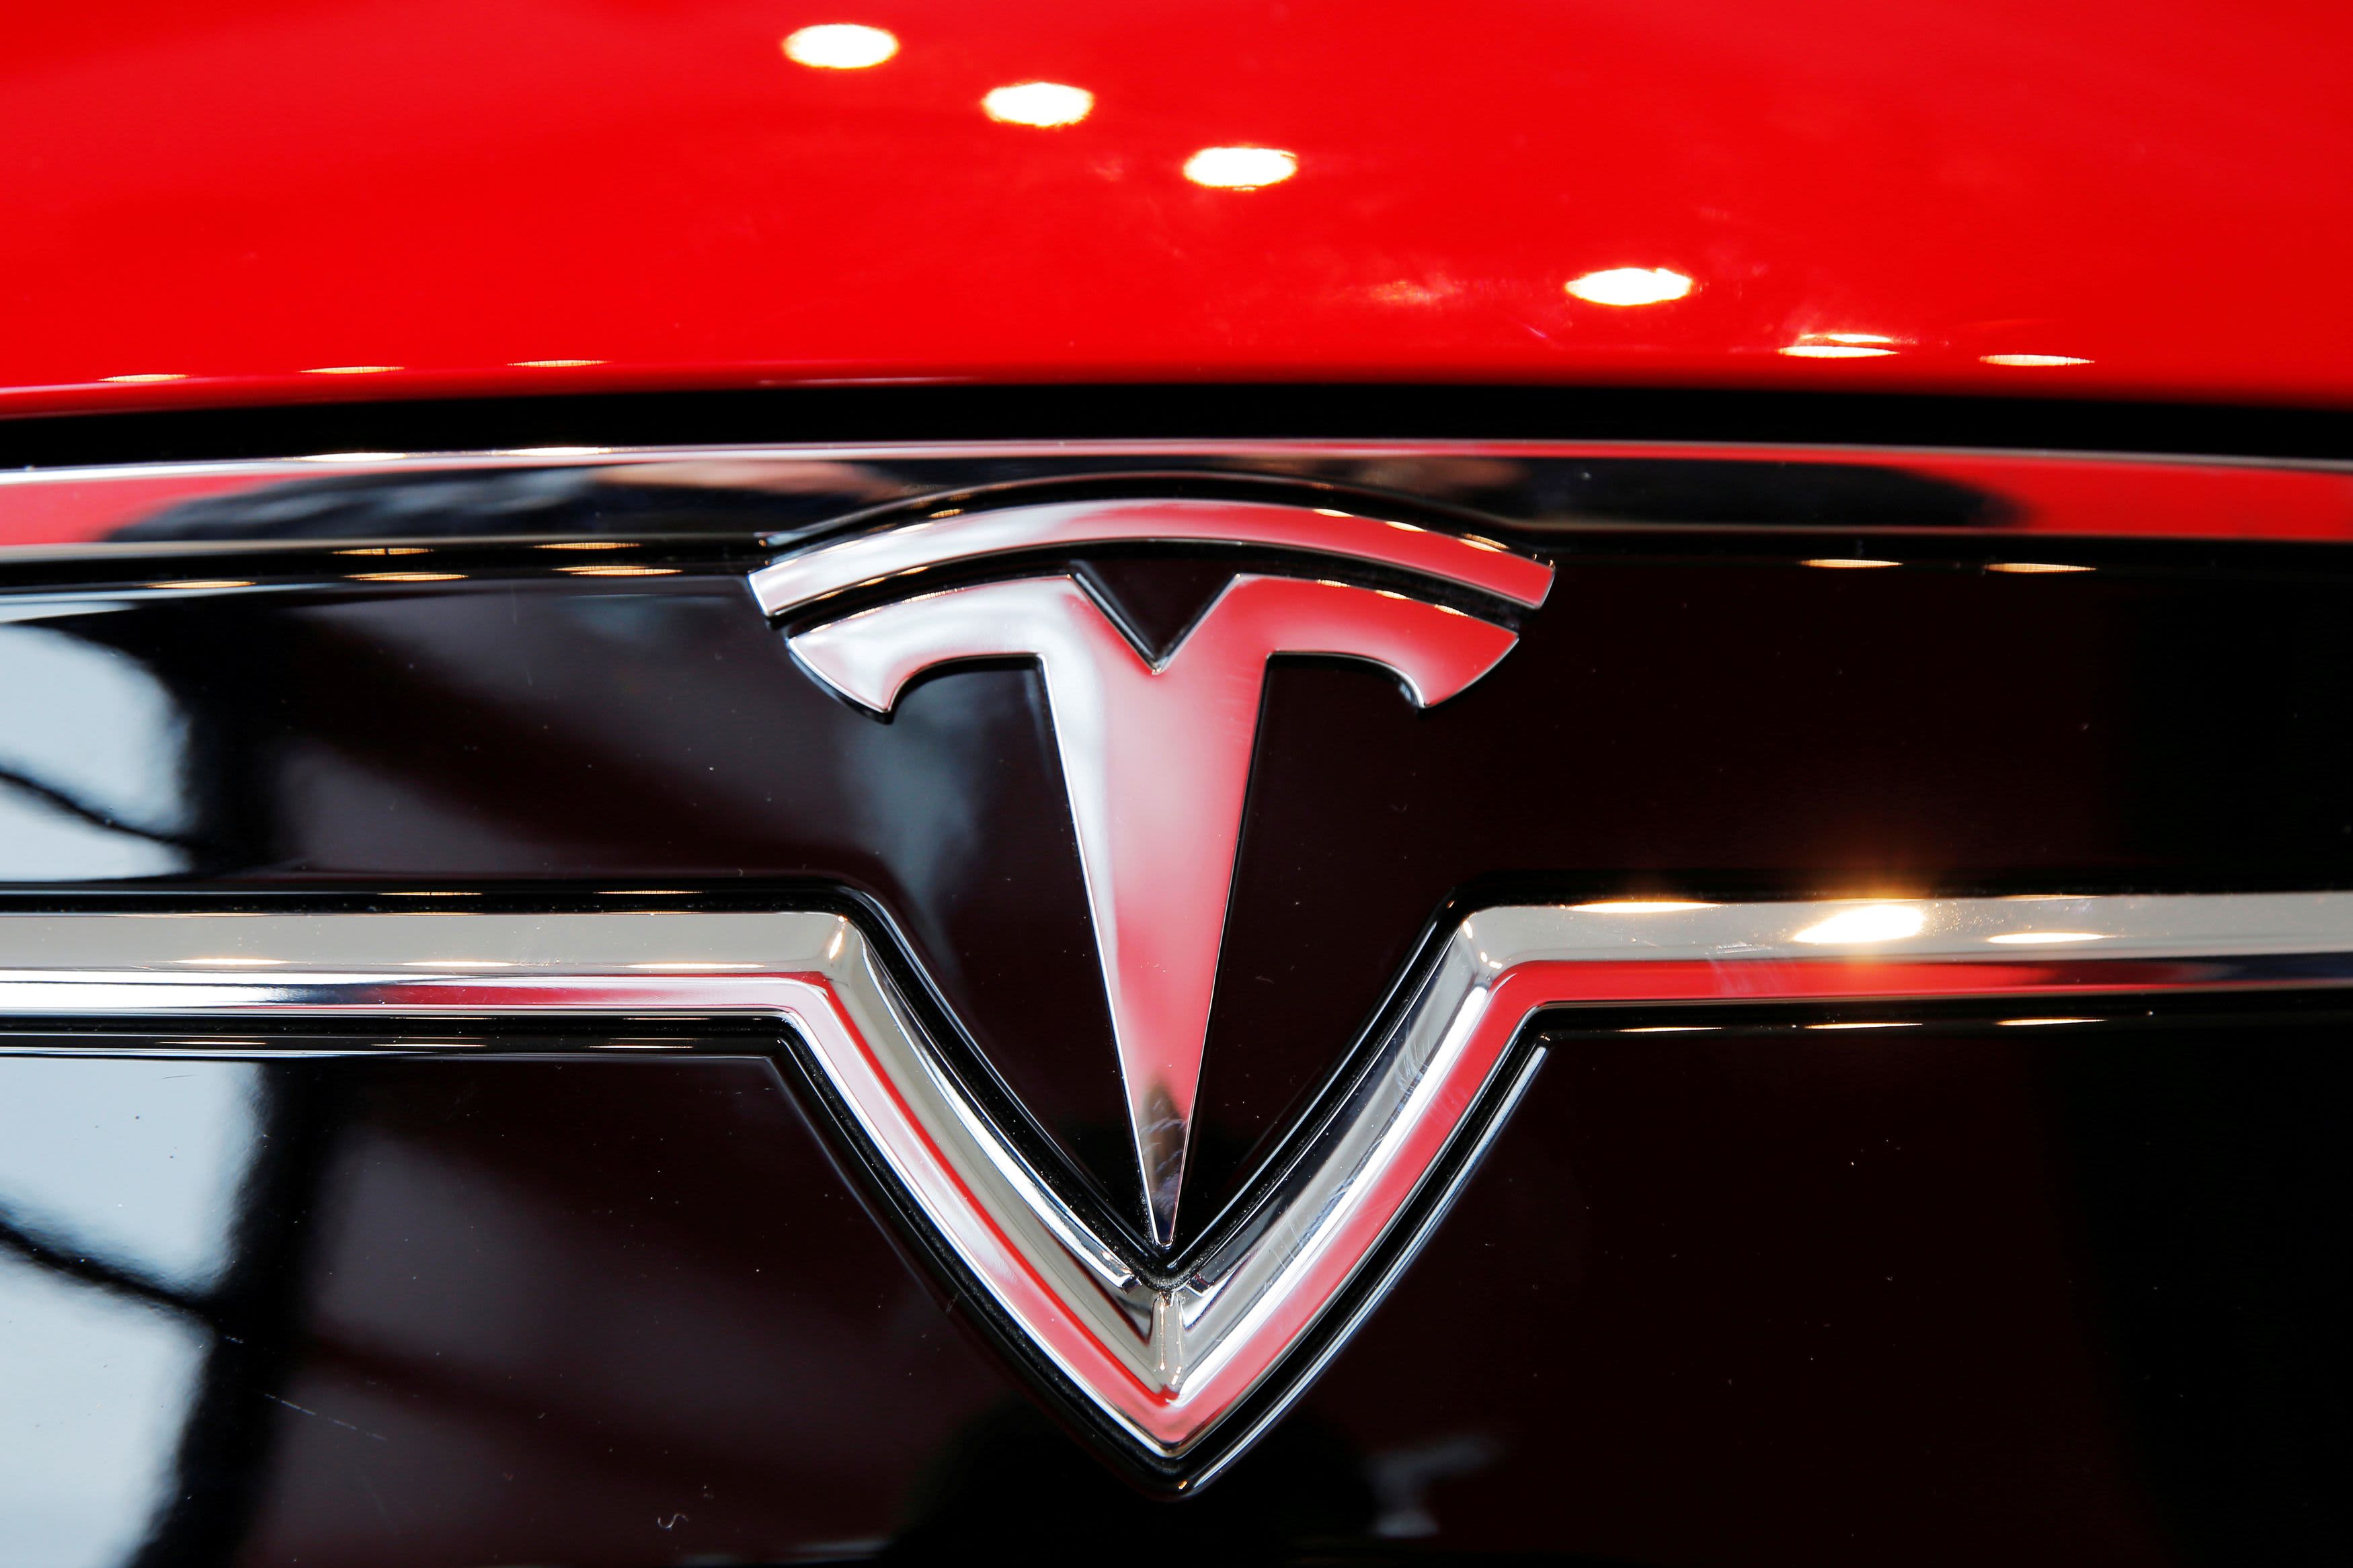 Autopilot not used during Texas Tesla accident